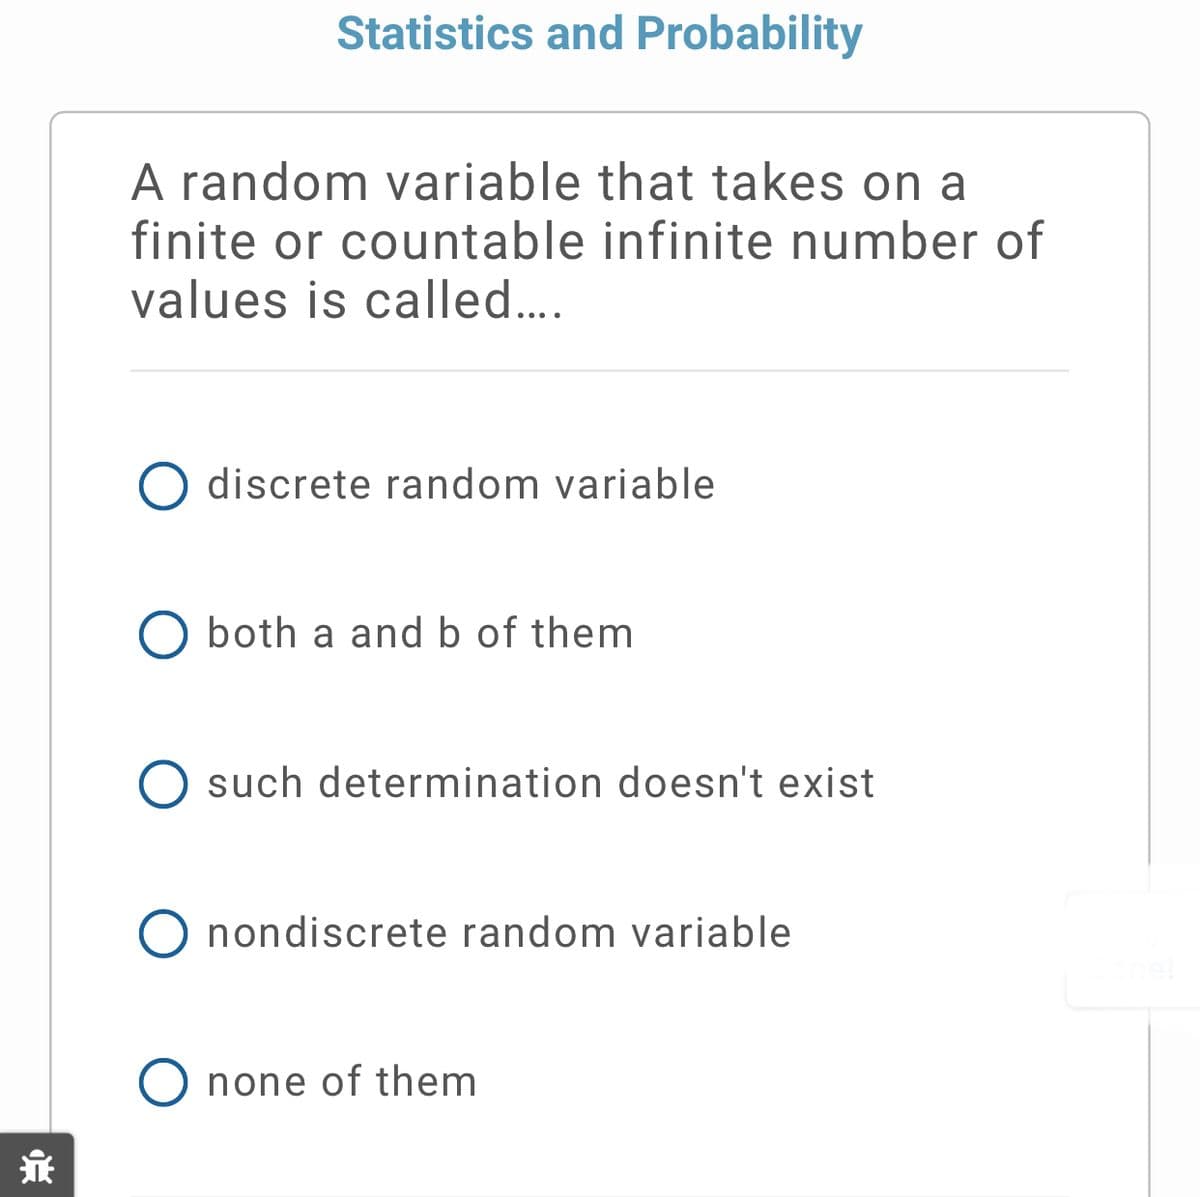 Statistics and Probability
A random variable that takes on a
finite or countable infinite number of
values is called...
discrete random variable
both a and b of them
O such determination doesn't exist
O nondiscrete random variable
O none of them
